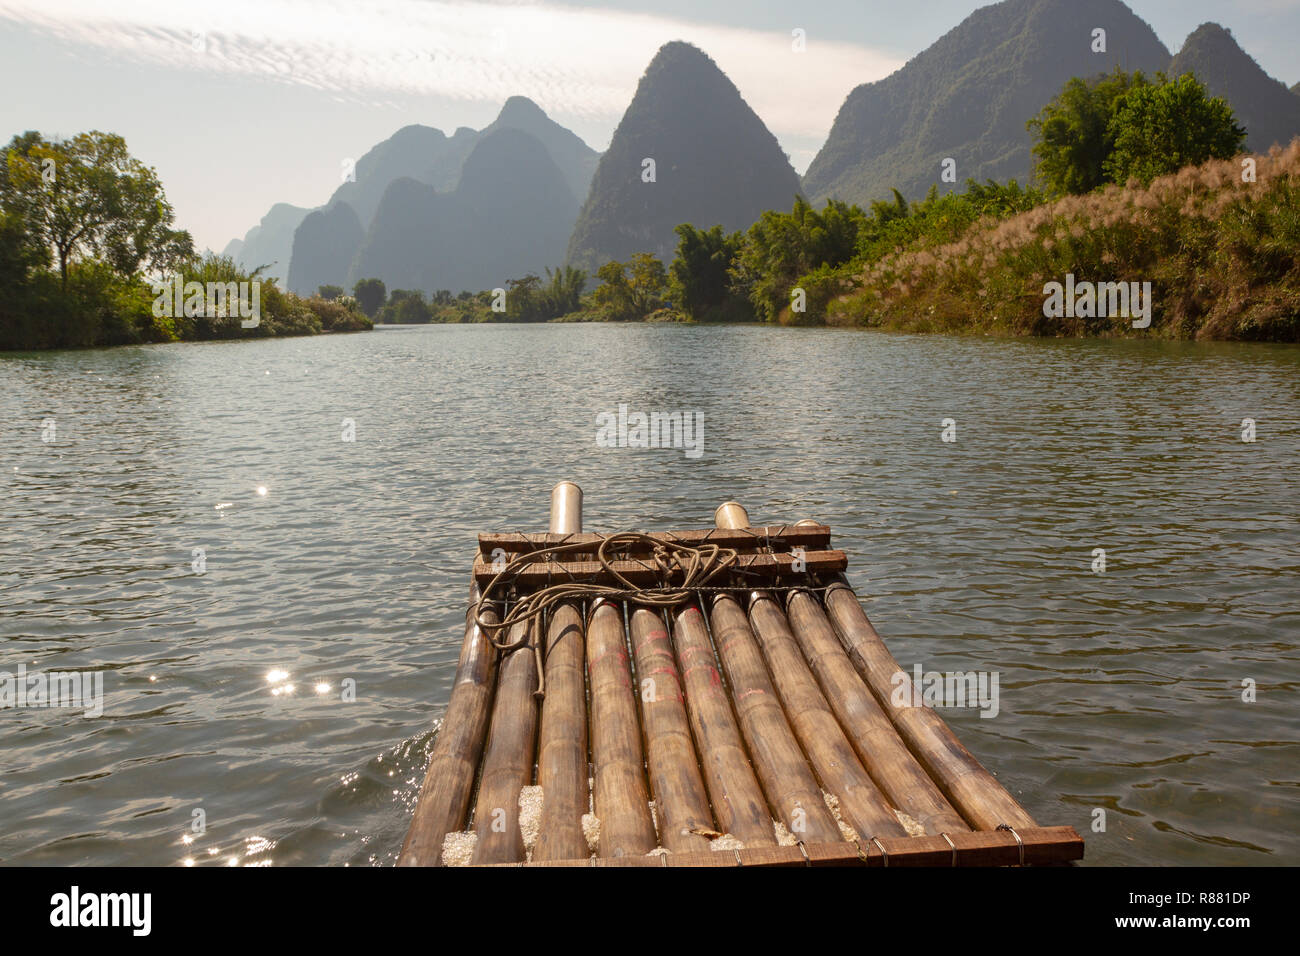 Front of bamboo raft in foreground on Yulong River, Yangshuo, China. Limestone cliffs in silhouette along edge of river. Stock Photo